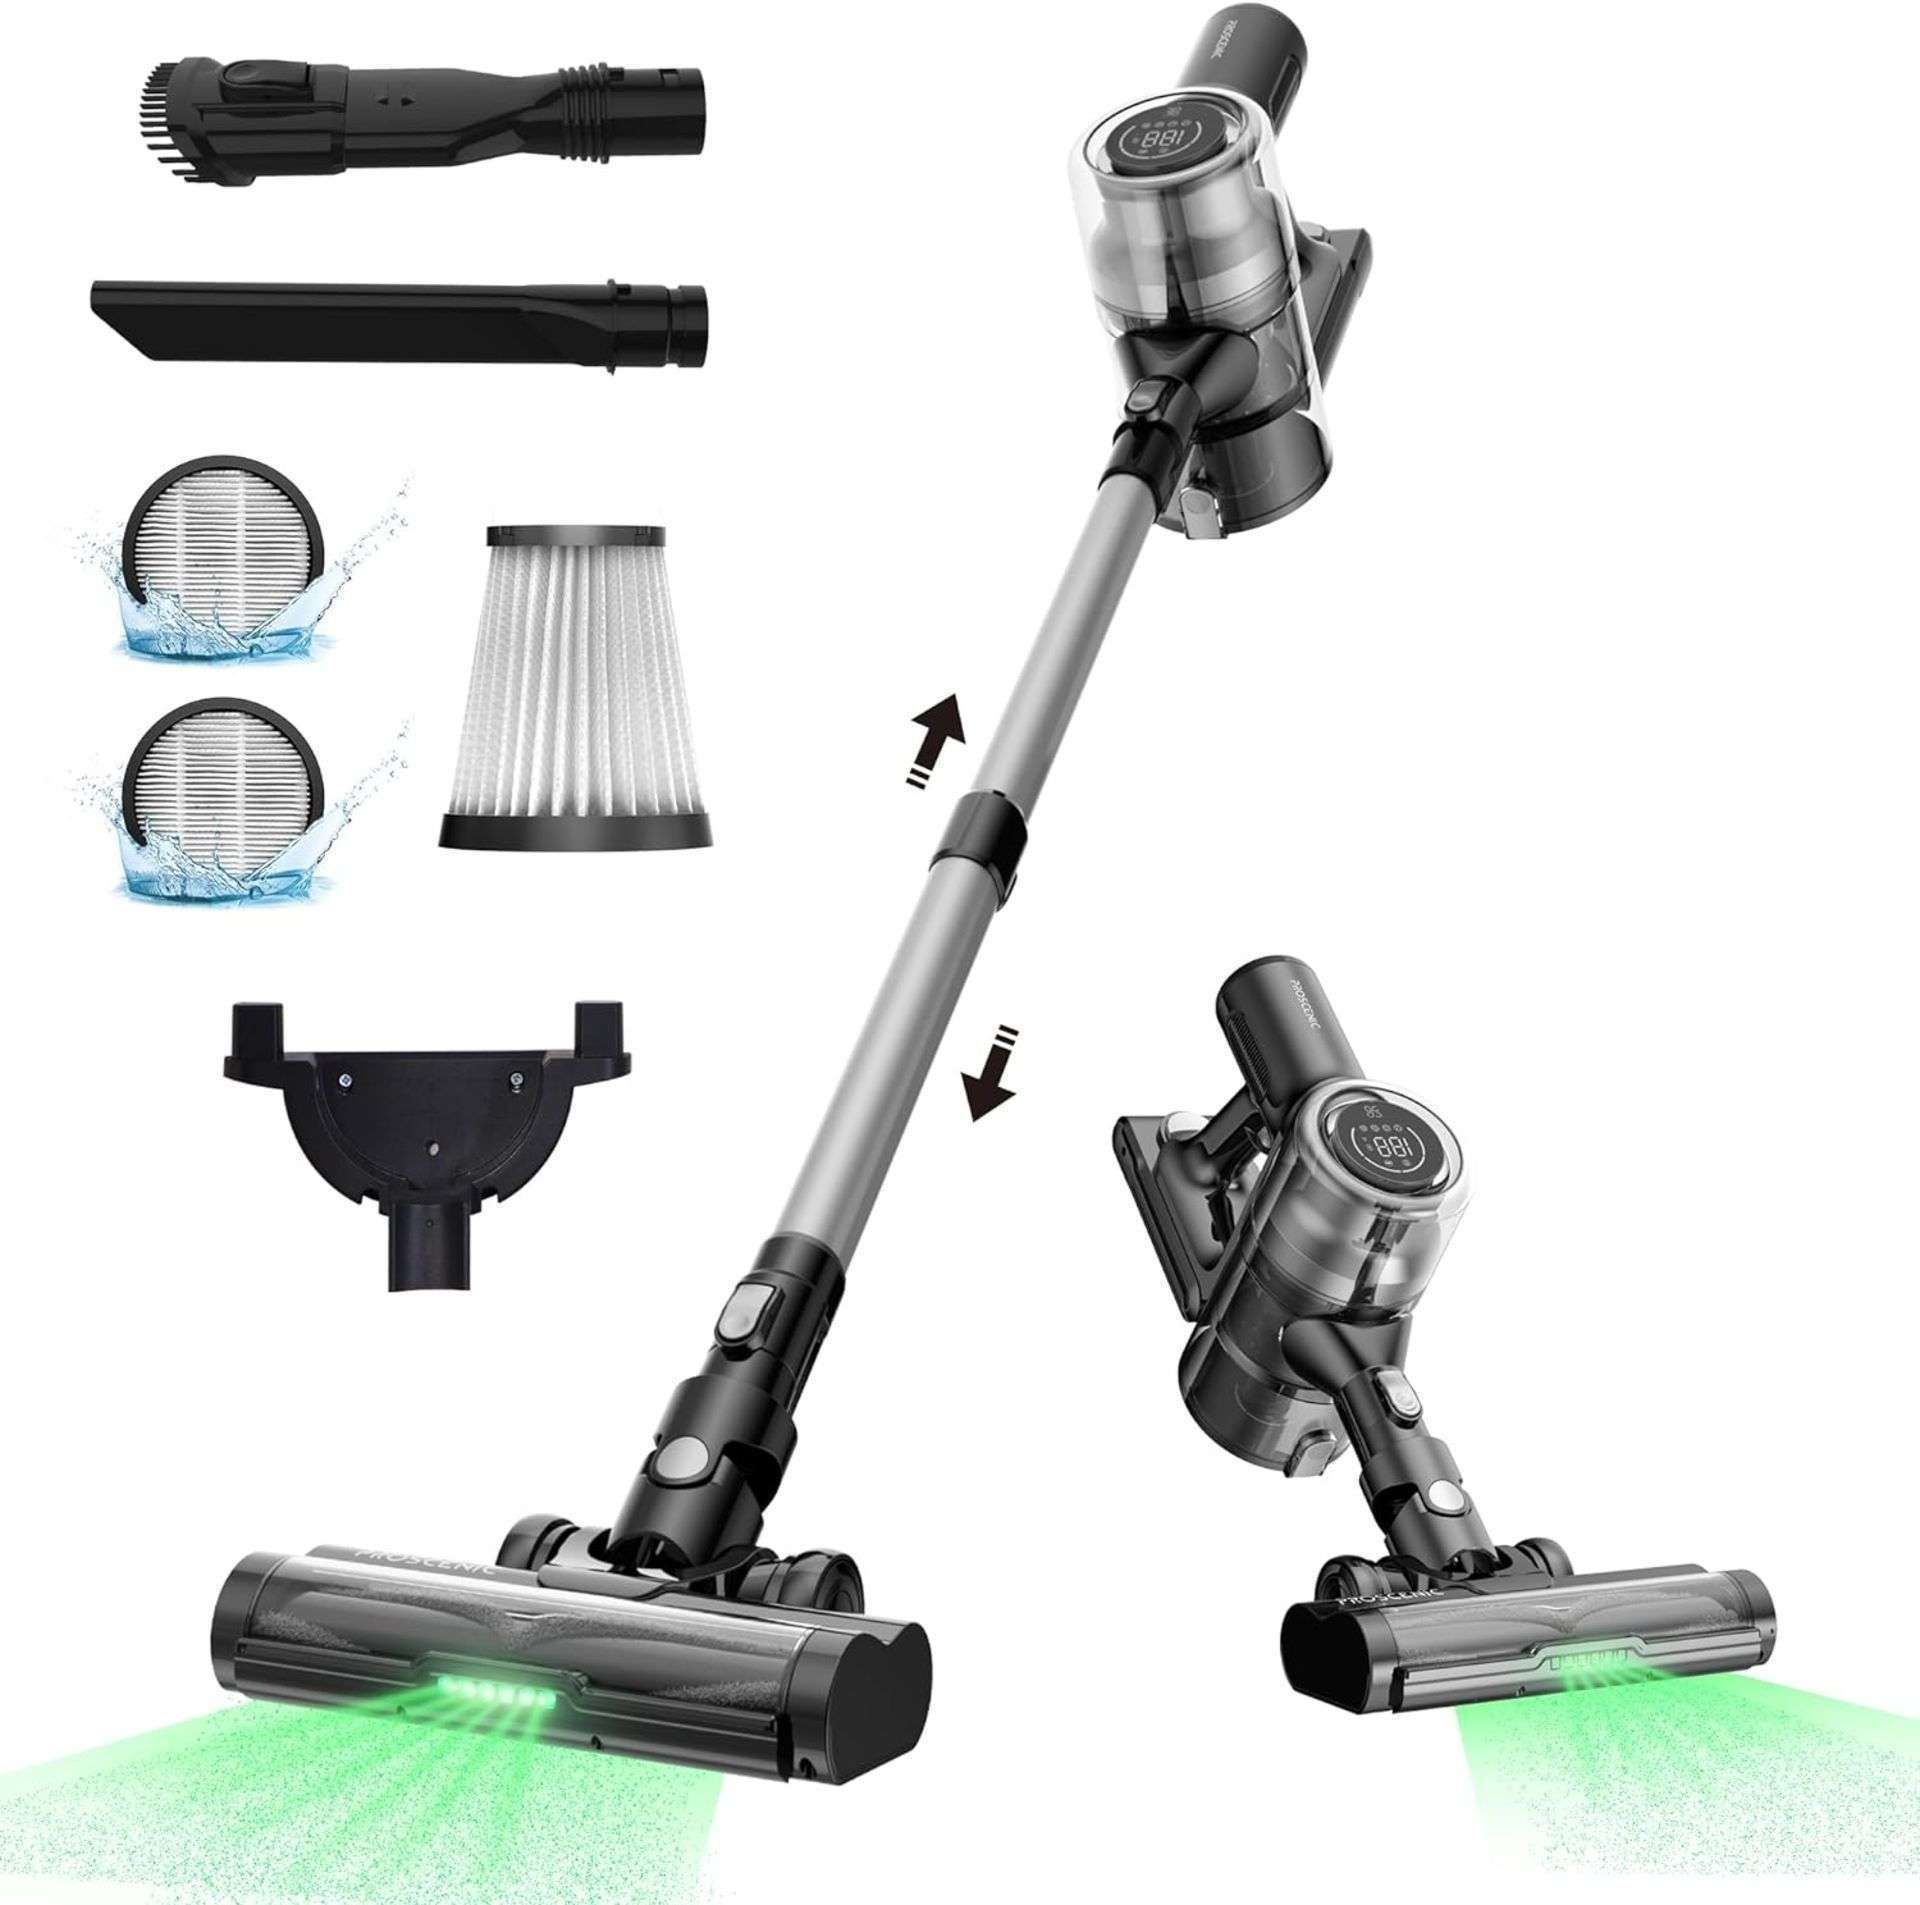 TRADE LOT 4 x New & Boxed Proscenic P12 Cordless Vacuum Cleaner, 33Kpa Stick Vacuum Cleaner with